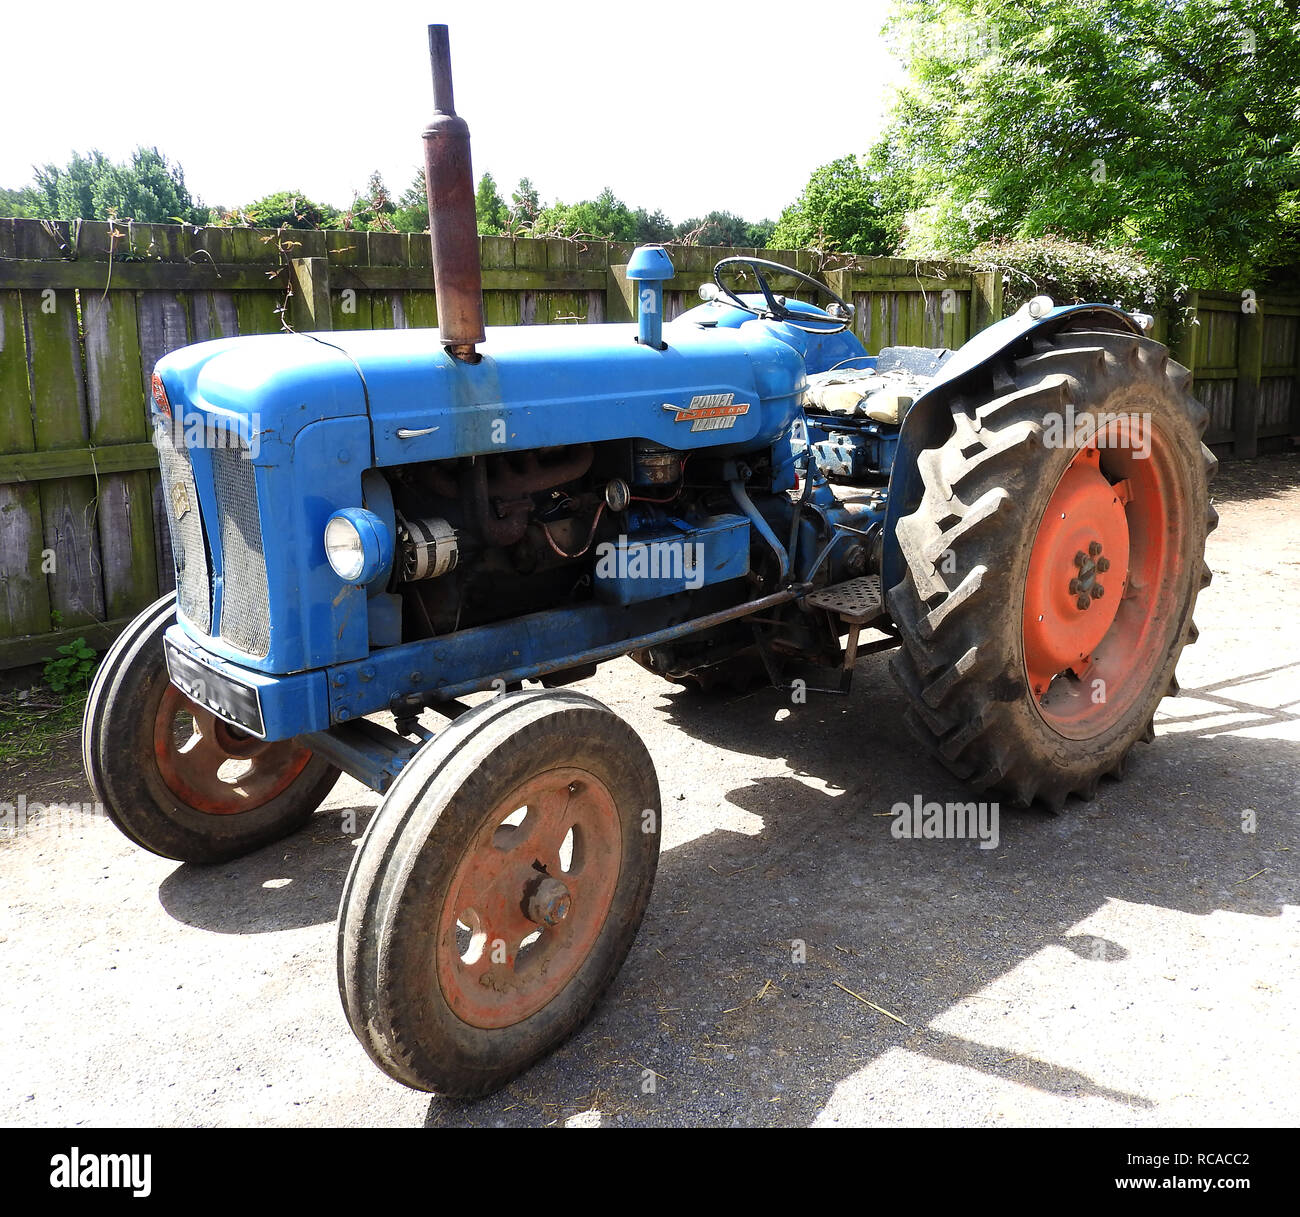 Ford Tractors UK. A working Fordson Power Major Tractor manufactured at classic,classicalDagenham, England (1958-1961) Stock Photo